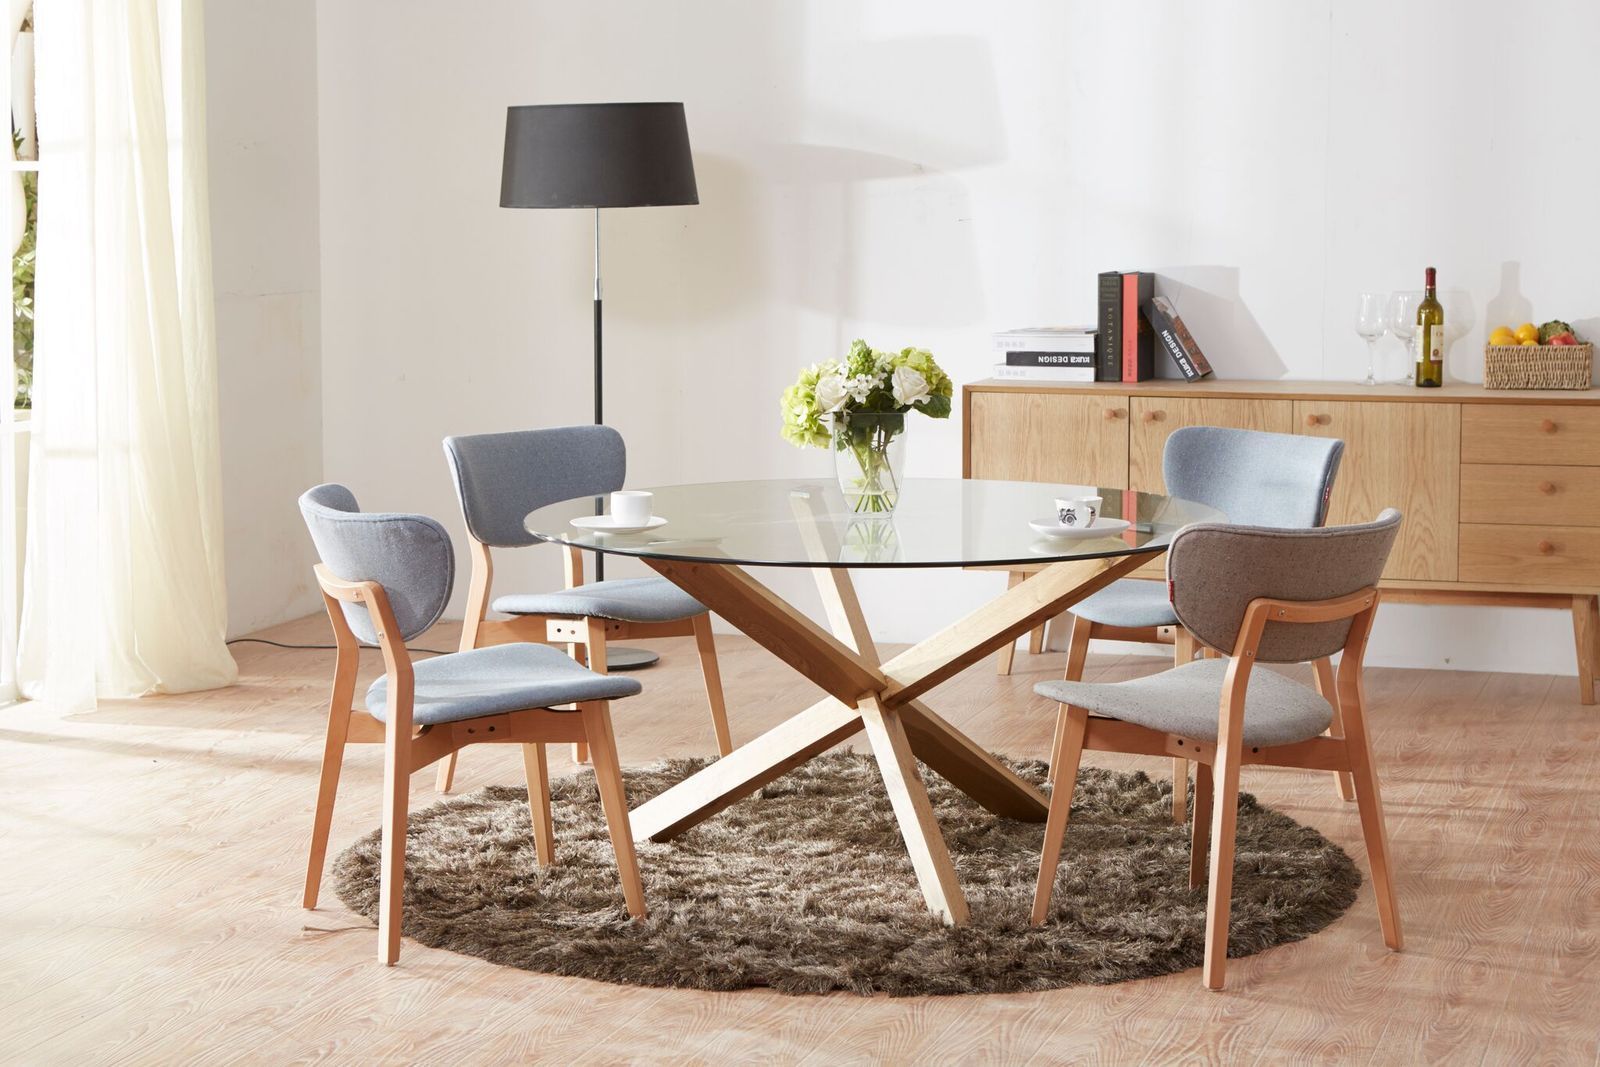 Contemporary Round Dining Room Tables With Leaves